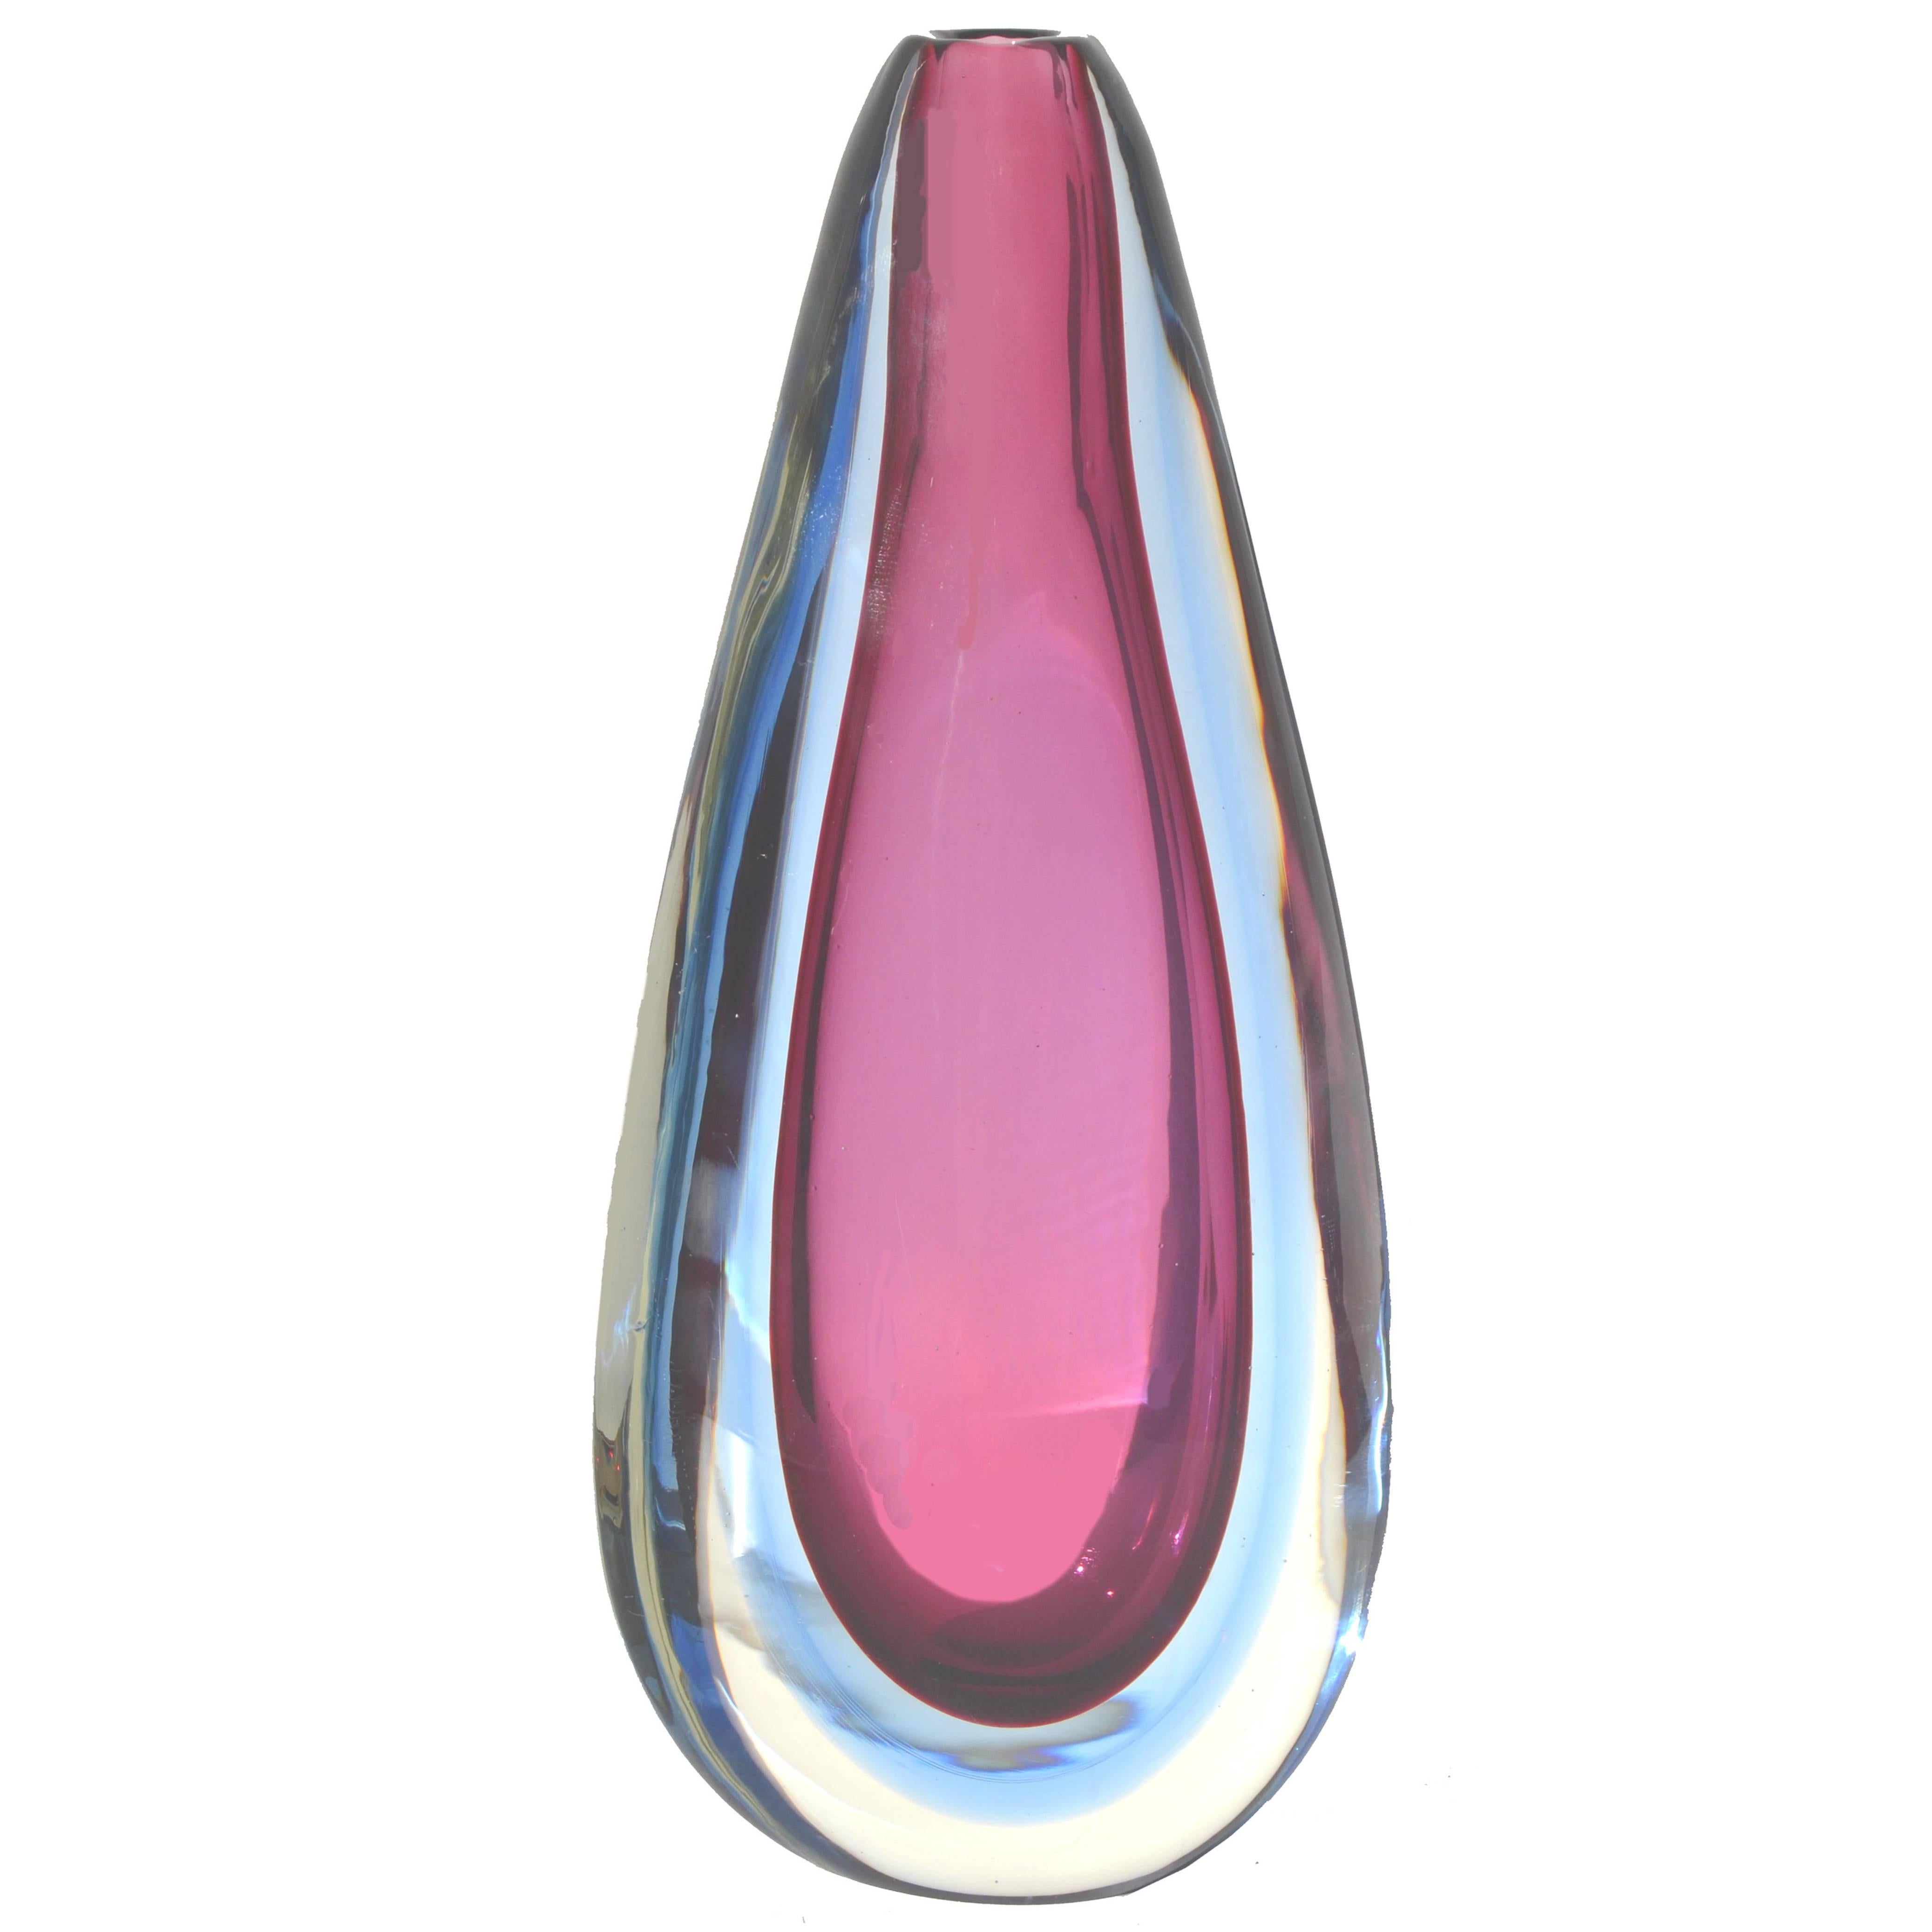 Amethyst and Blue Murano Sommerso Teardrop Vase